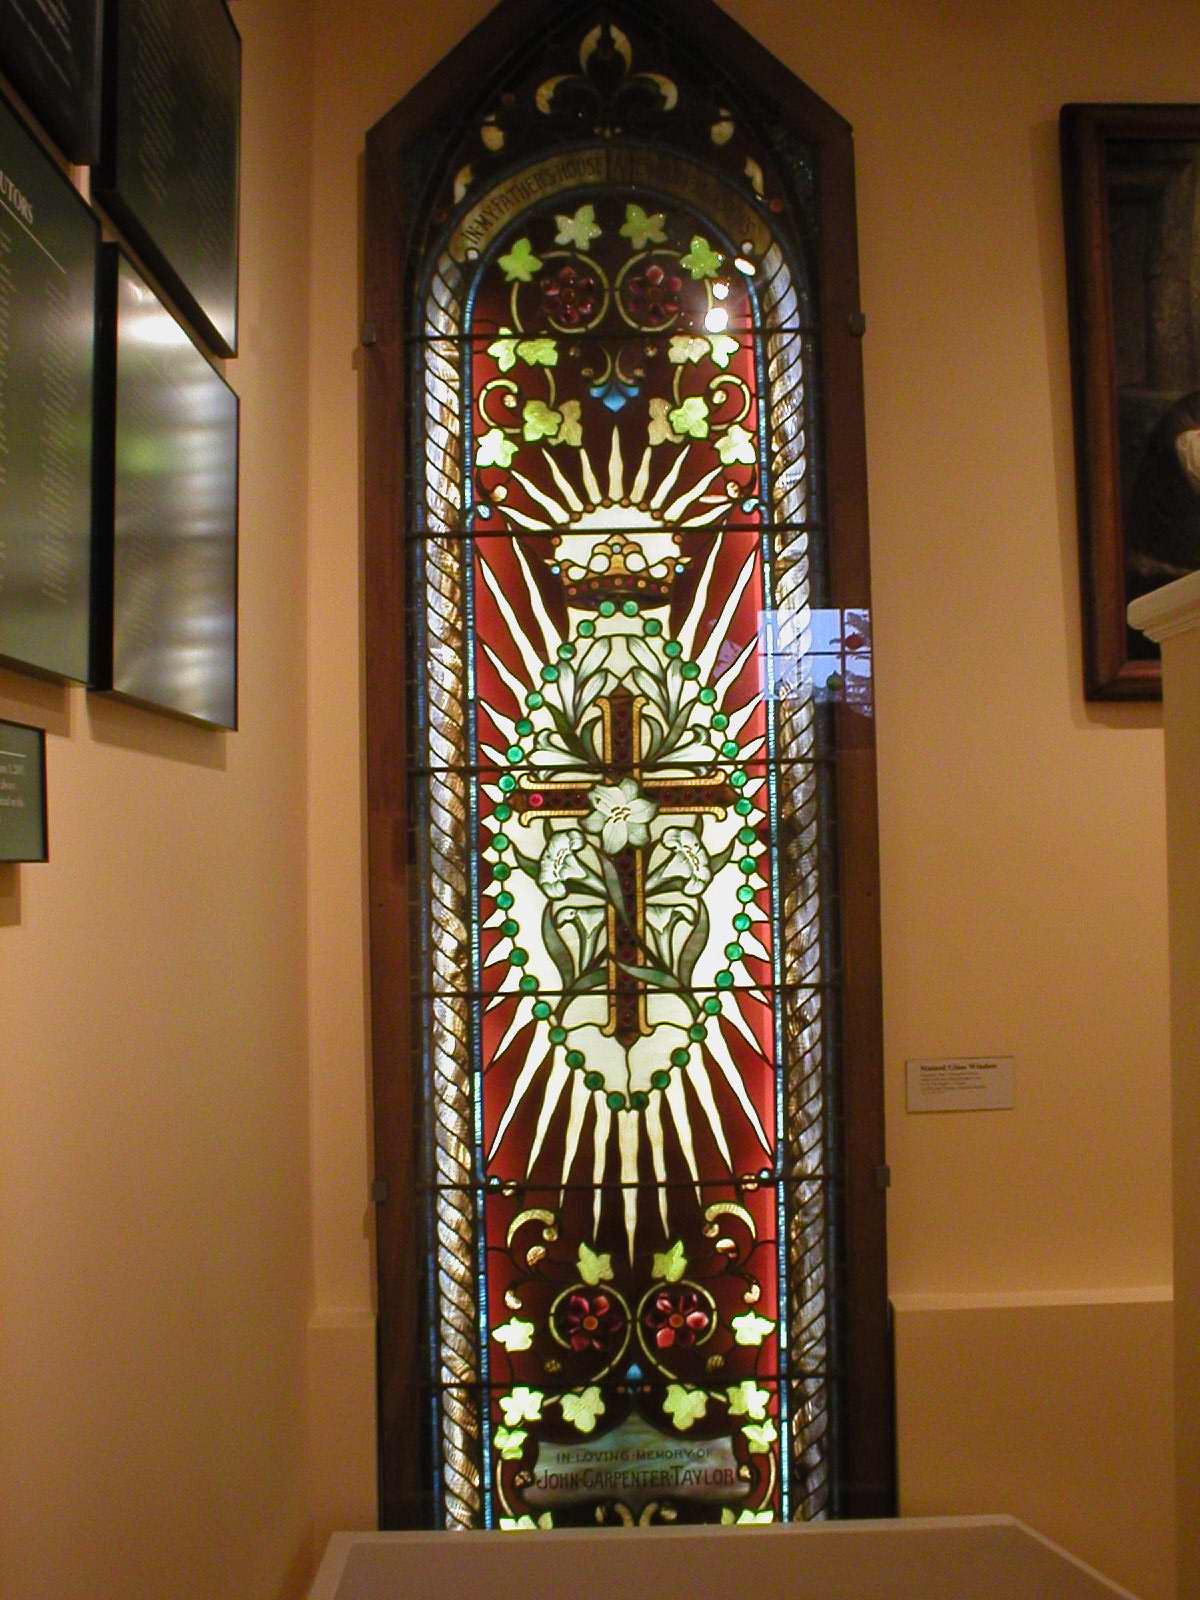 Example of Stained glass window at Atwood House Museum.